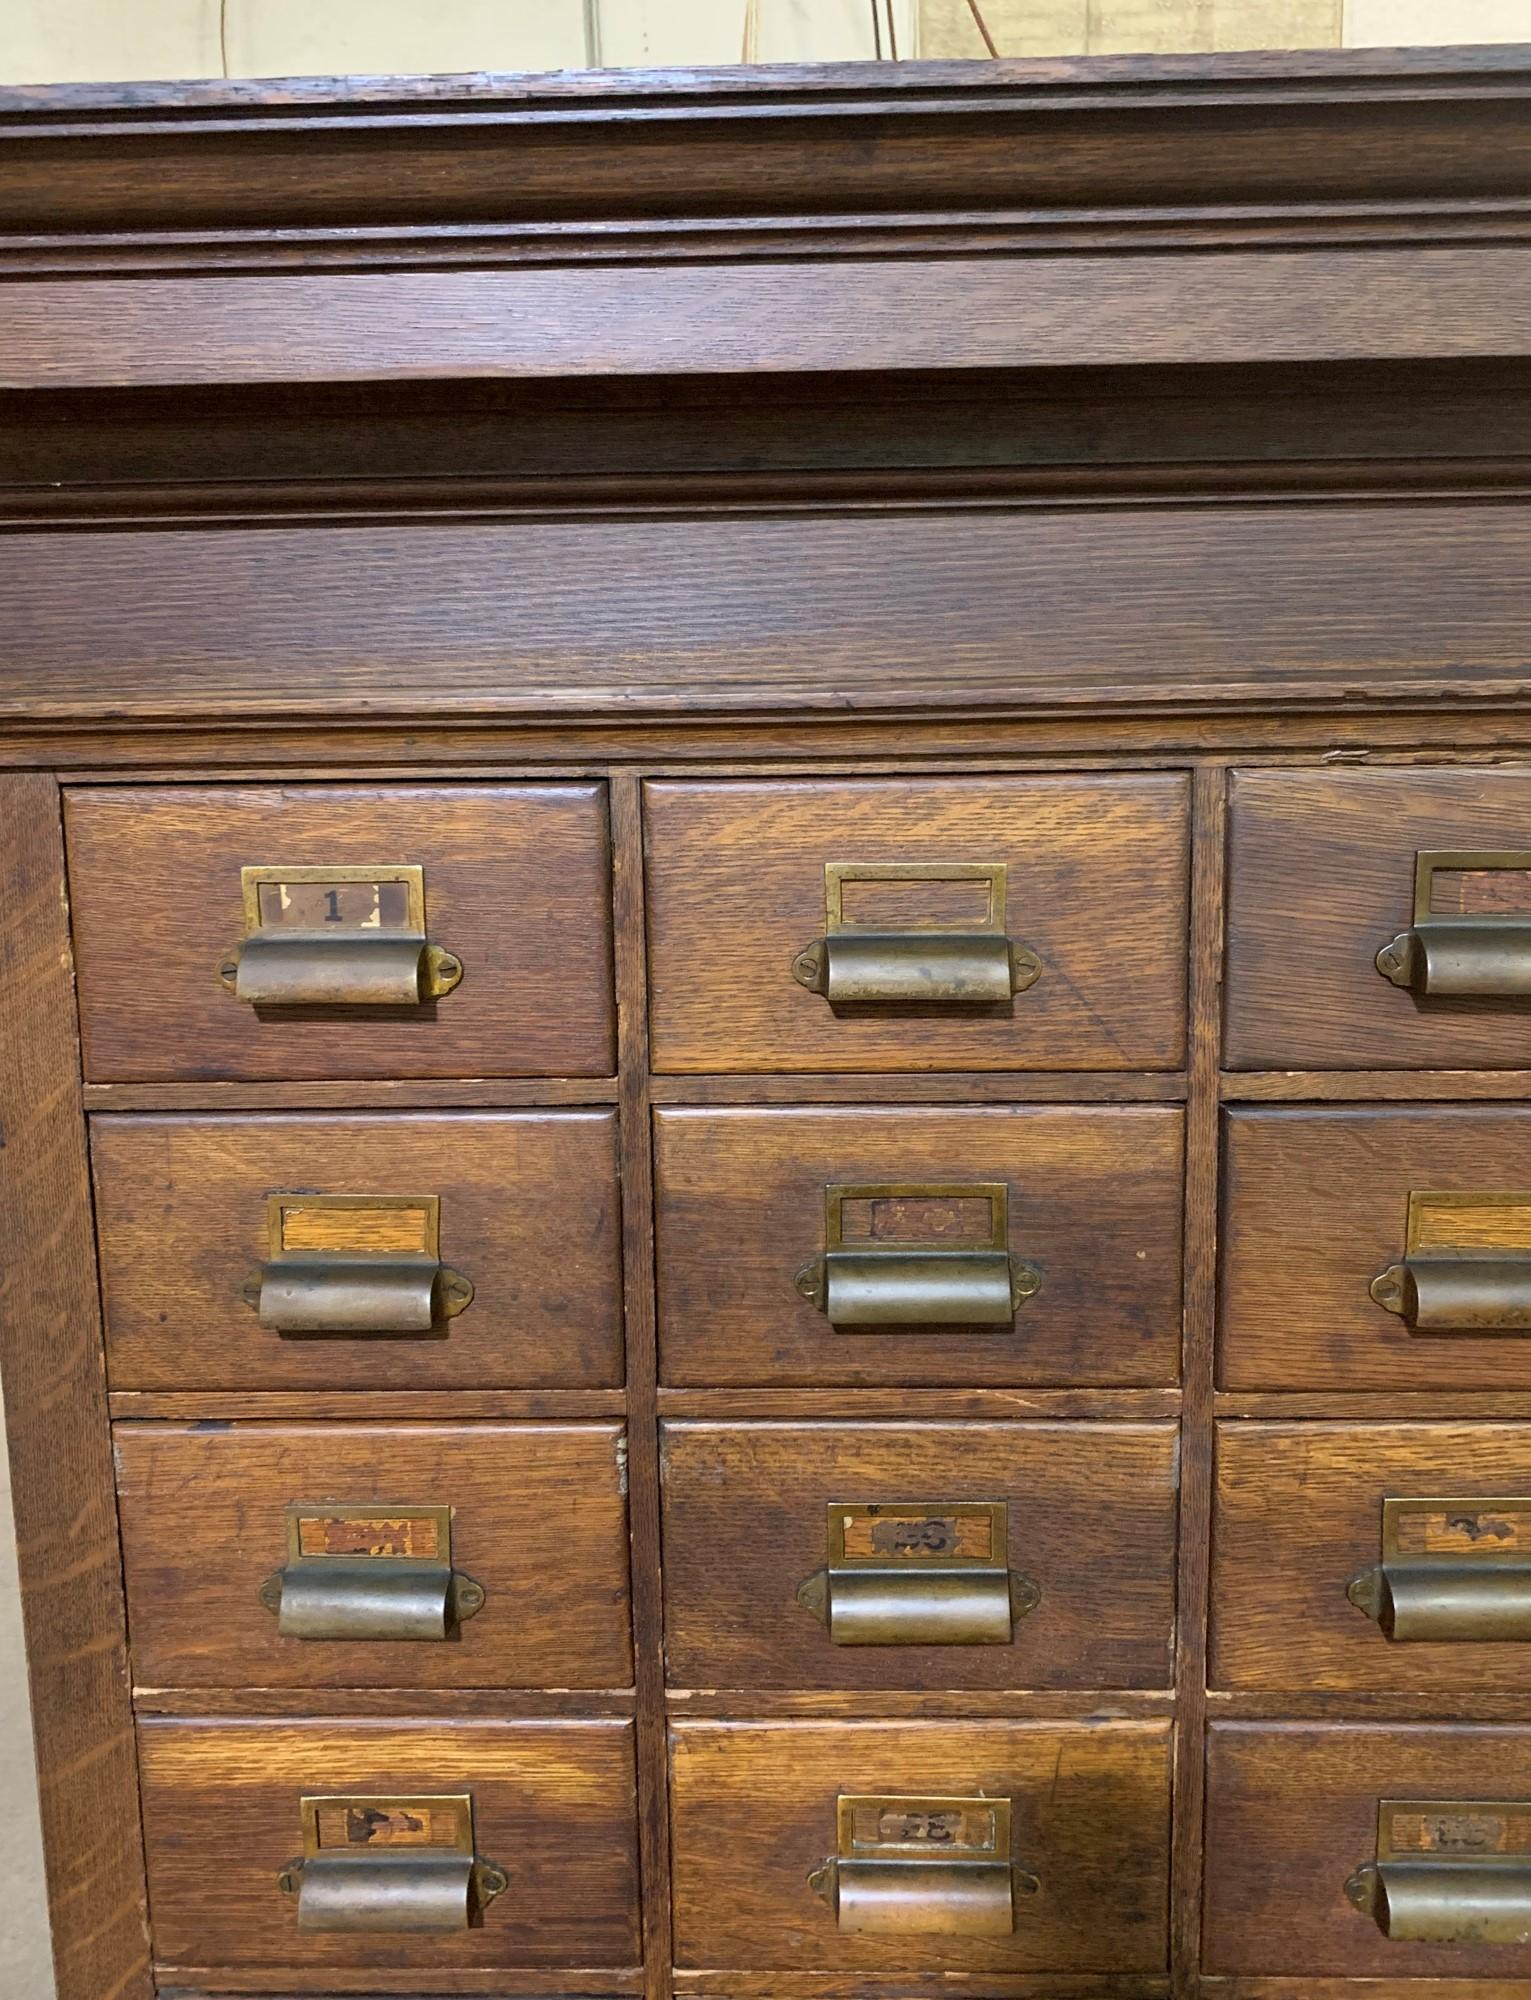 Massachusetts Industrial oakwood apothecary cabinet from the late 1800s. This comes in an upper and lower section. There are 108 catalog drawers in the upper part and three bottom sections in the lower part. This piece has been recently restored.